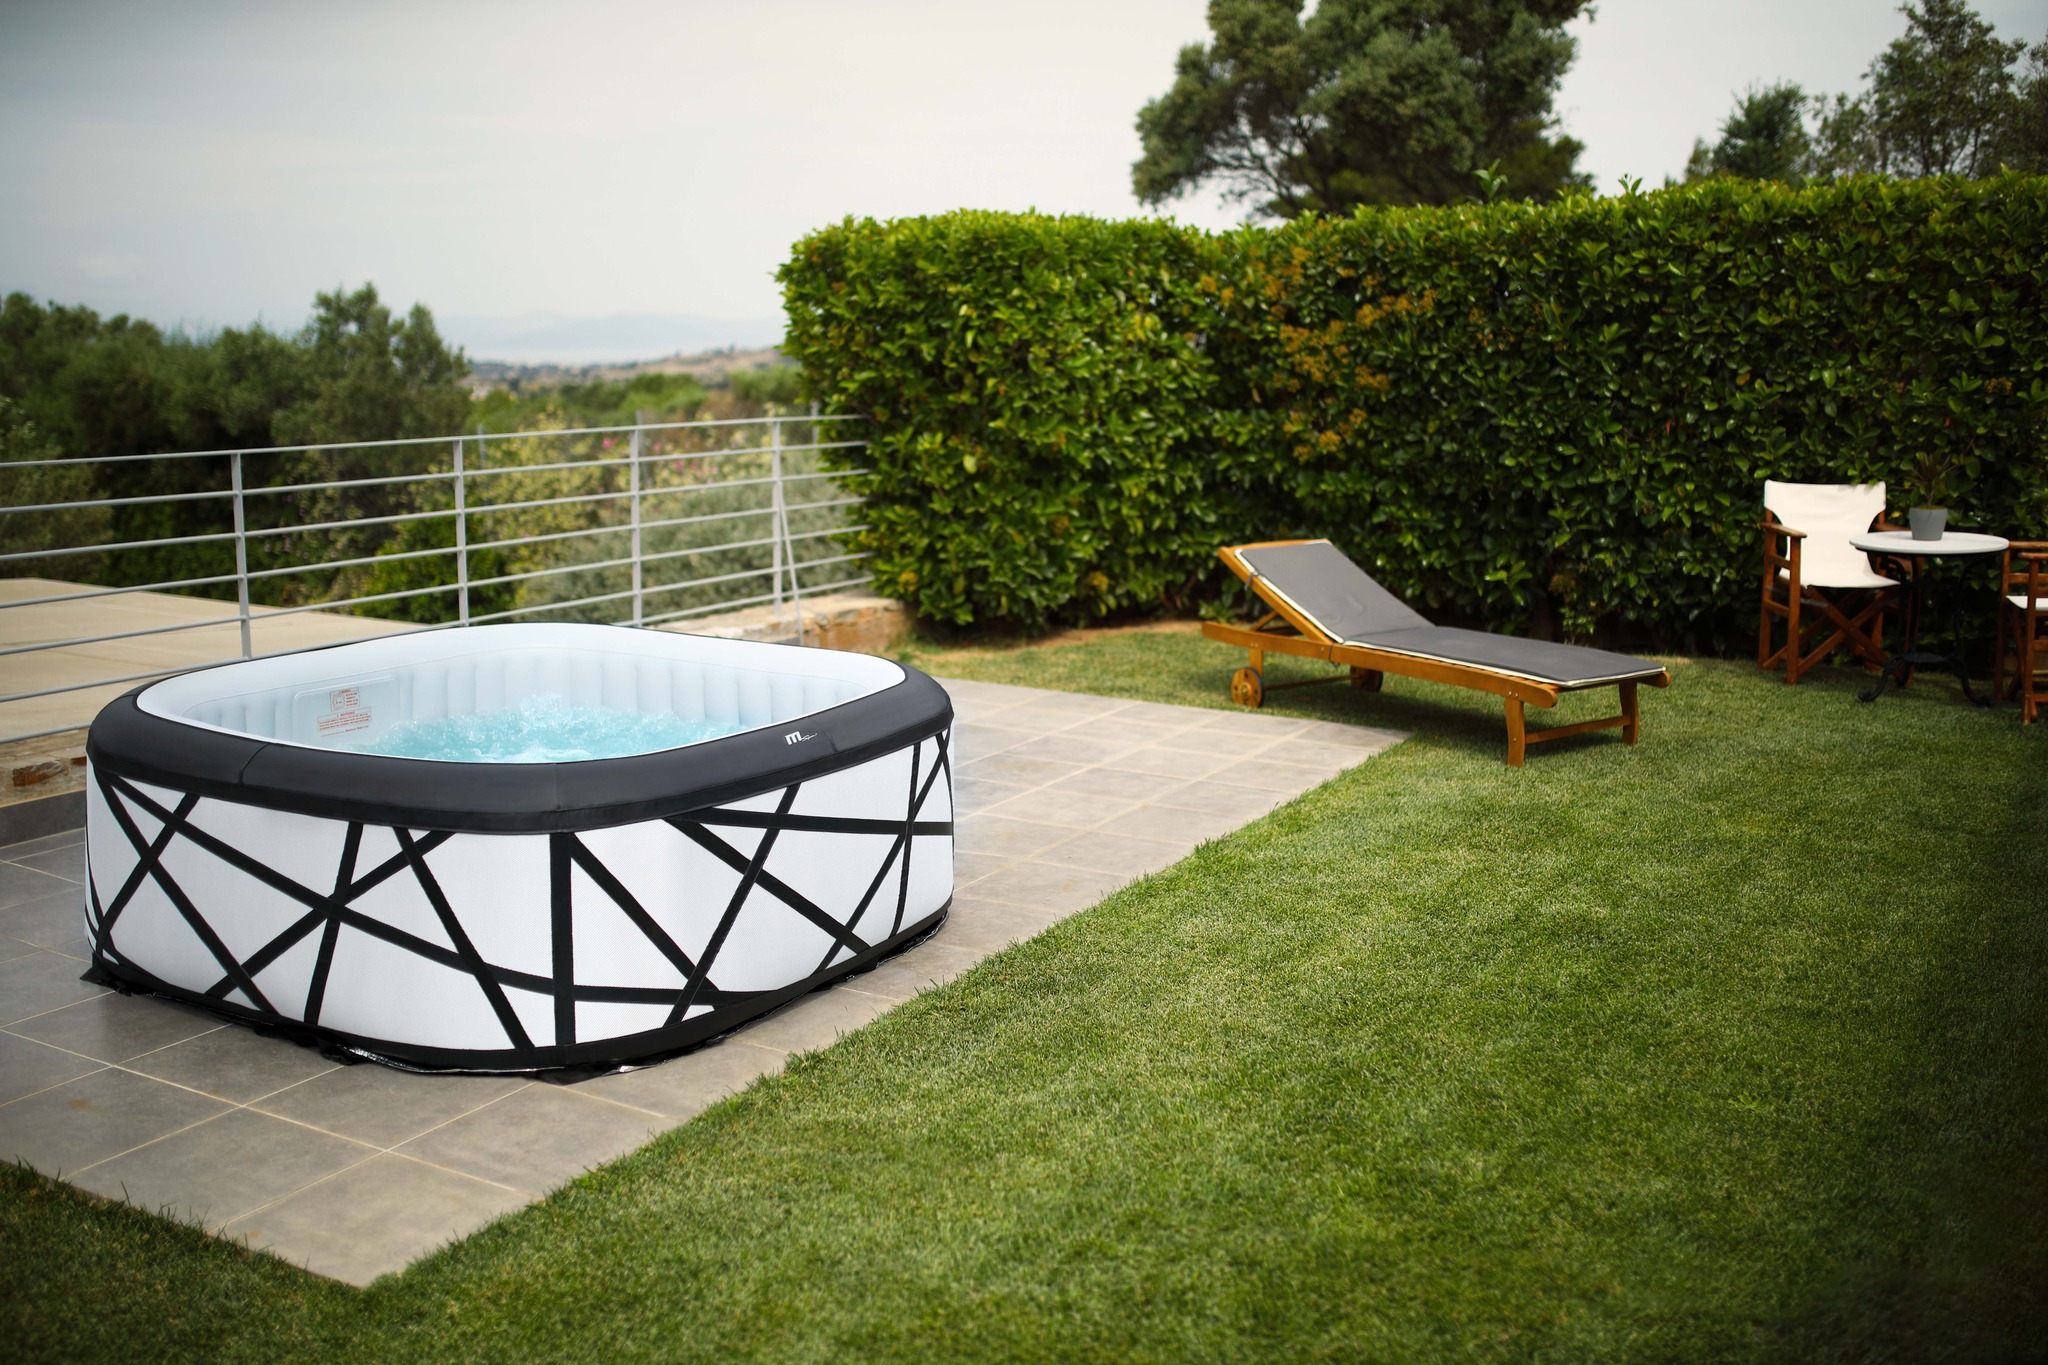 Relax and enjoy life with the Soho inflatable hot tub
 

 » Outdoor Furniture Fuengirola, Costa Del Sol, Spain